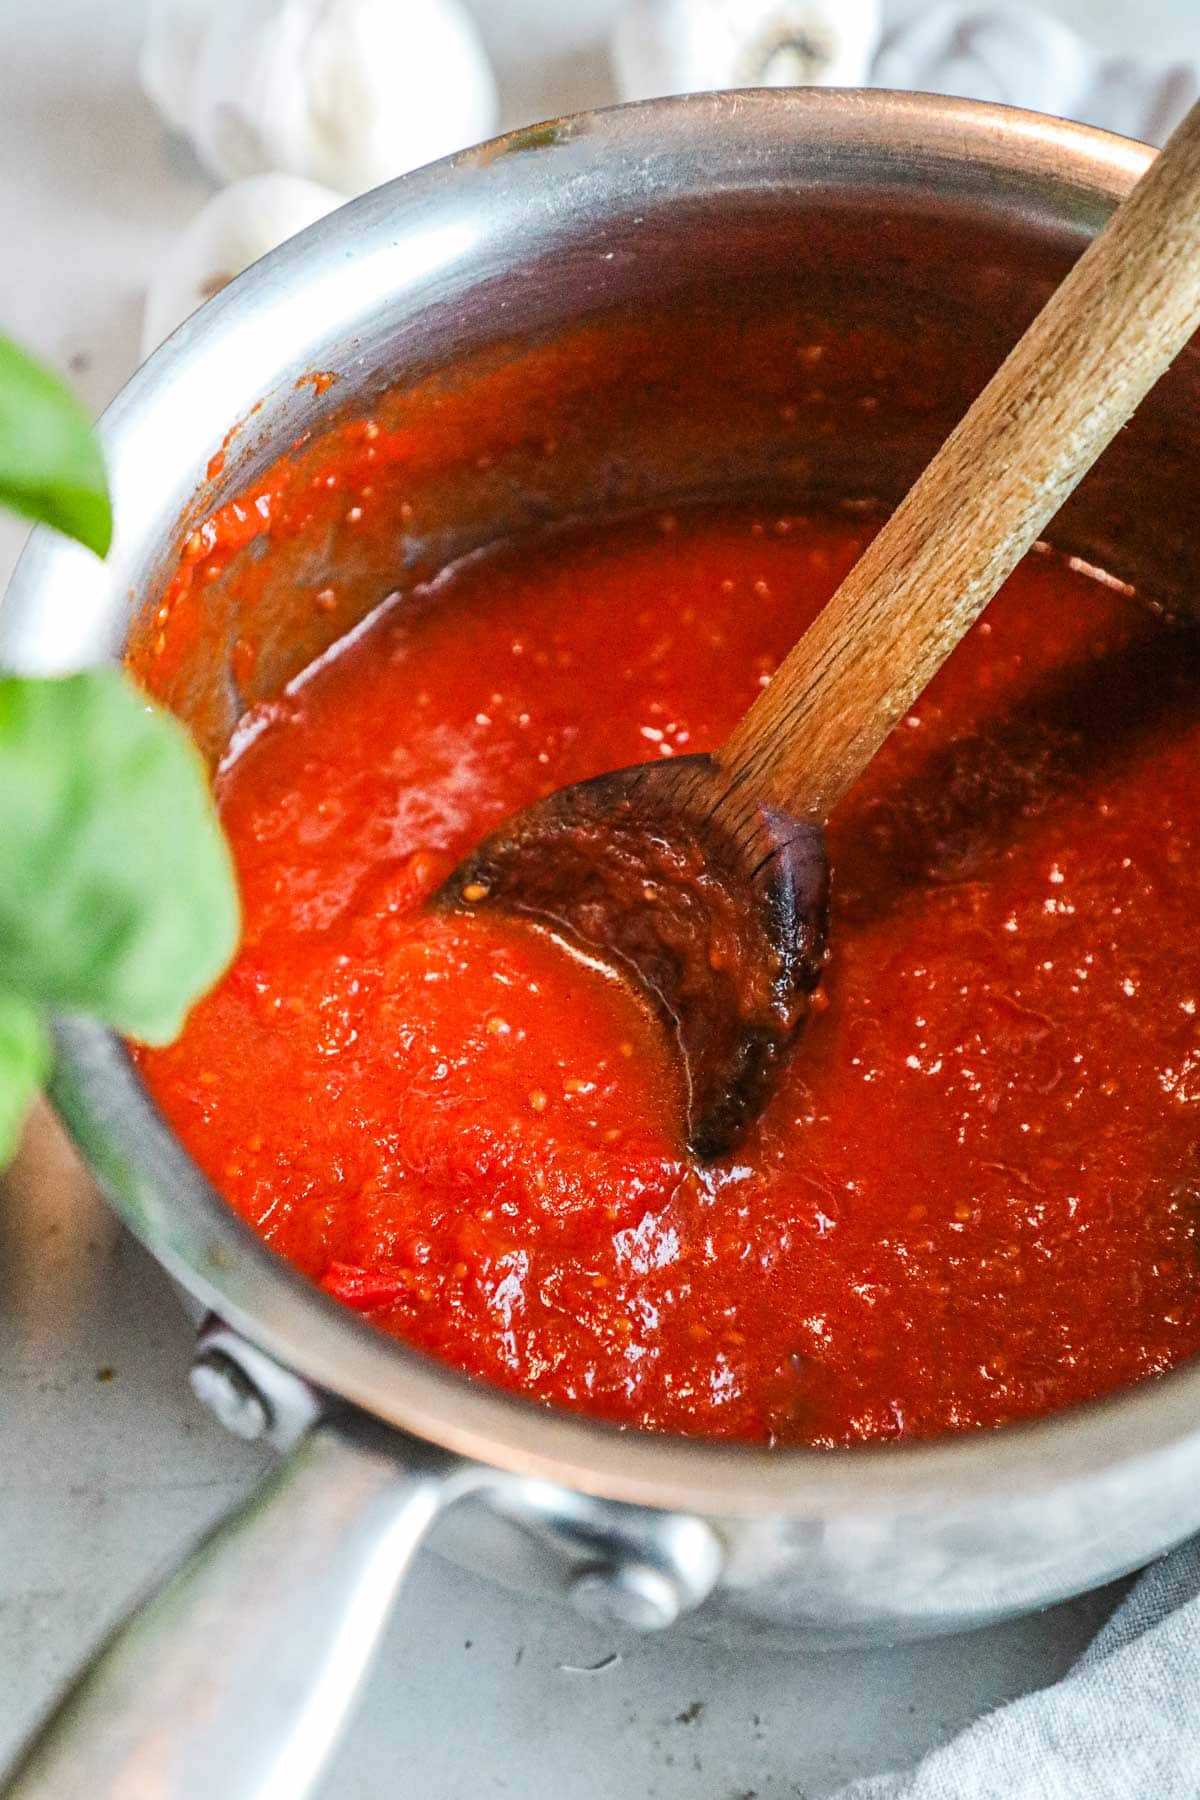 Authentic pomodoro sauce made with San Marzano tomatoes simmering in a pot, used for pasta, lasagna, pizza, eggplant parmigiana, and more.